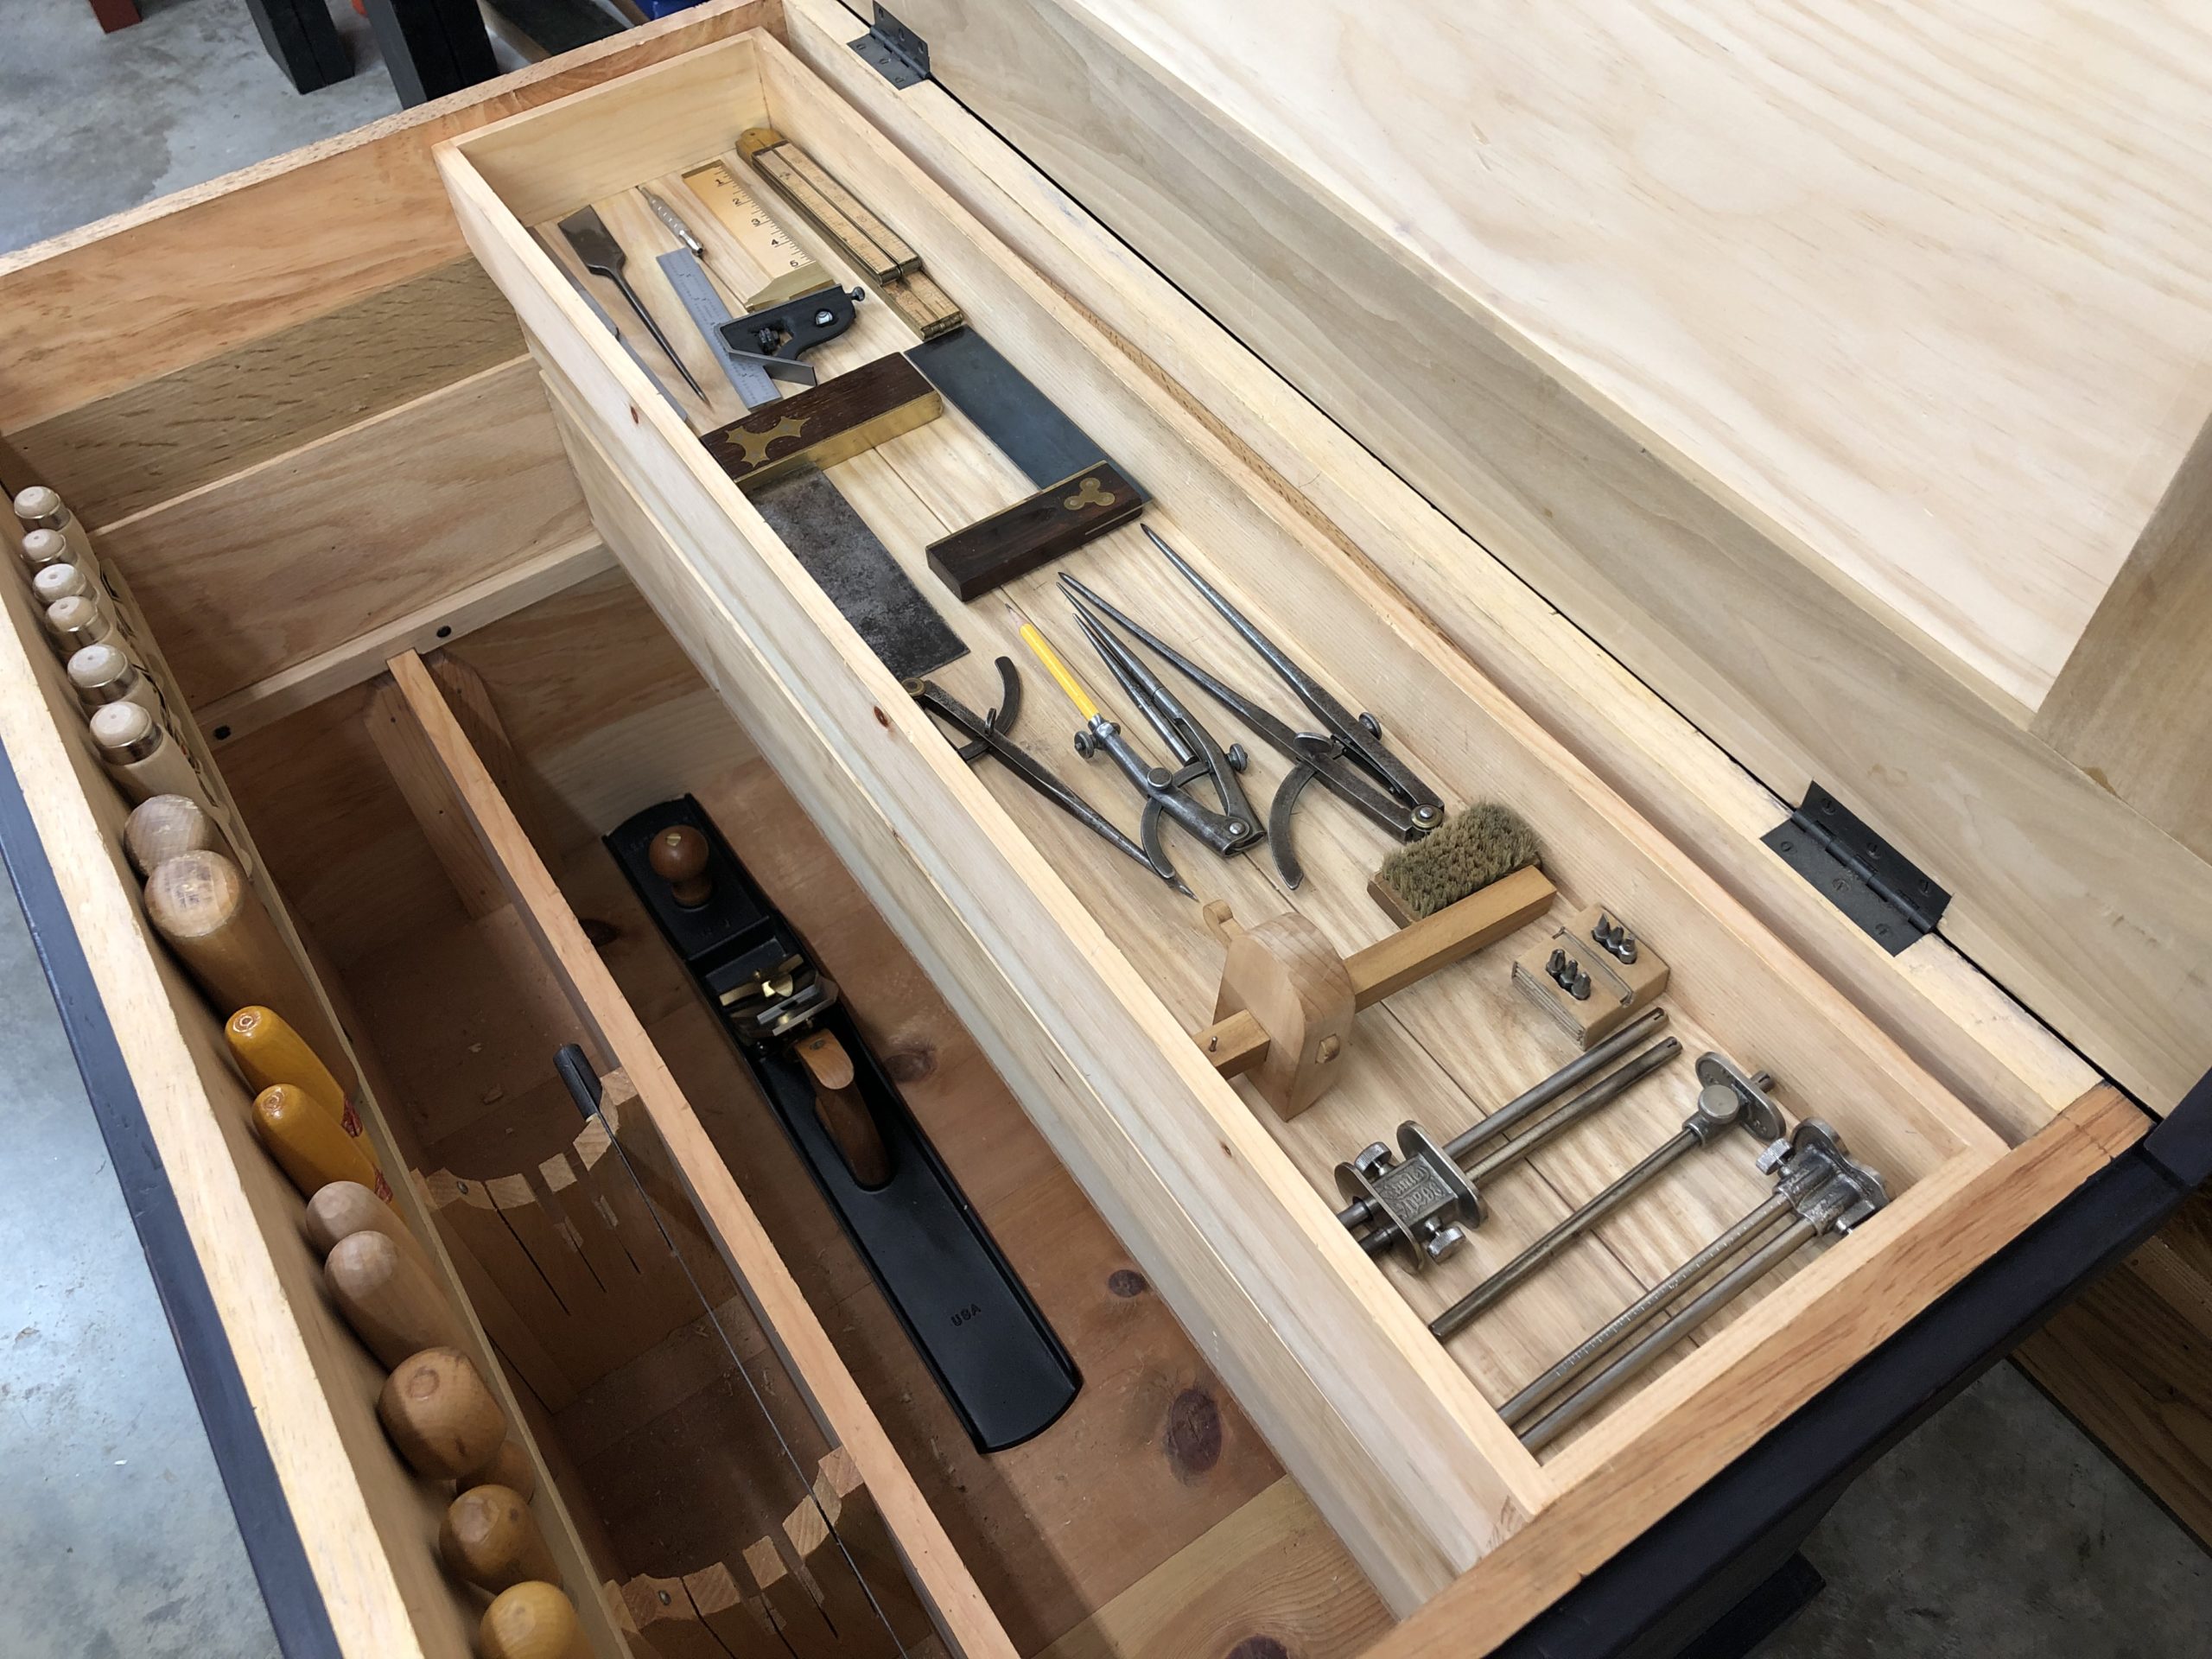 Organized Till of an English Tool Chest